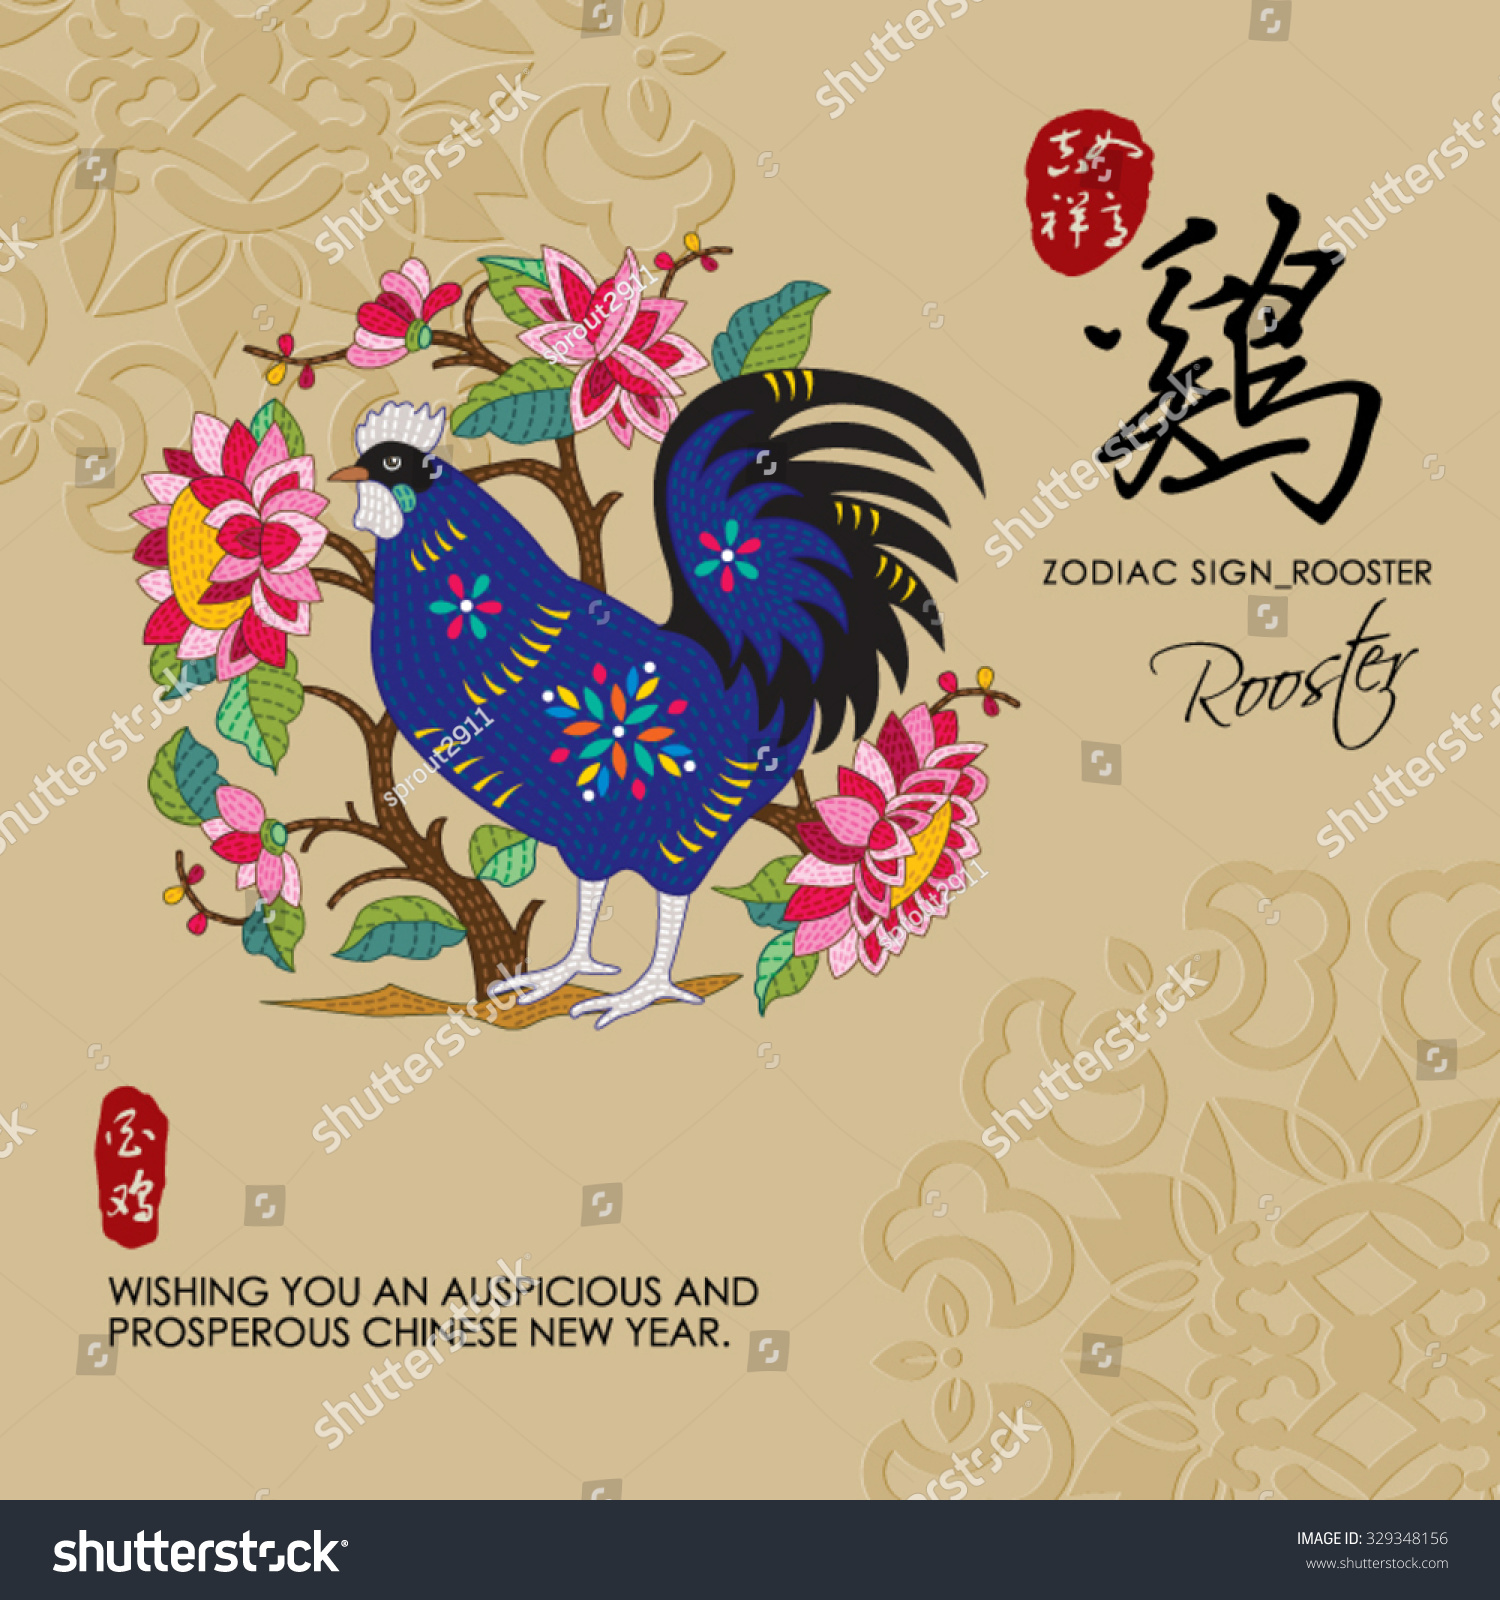 SVG of 12 Chinese Zodiac Signs of Rooster with chinese calligraphy text and the translation. Auspicious Chinese Seal (top) Good luck and happiness to you and (bottom) Rooster. svg